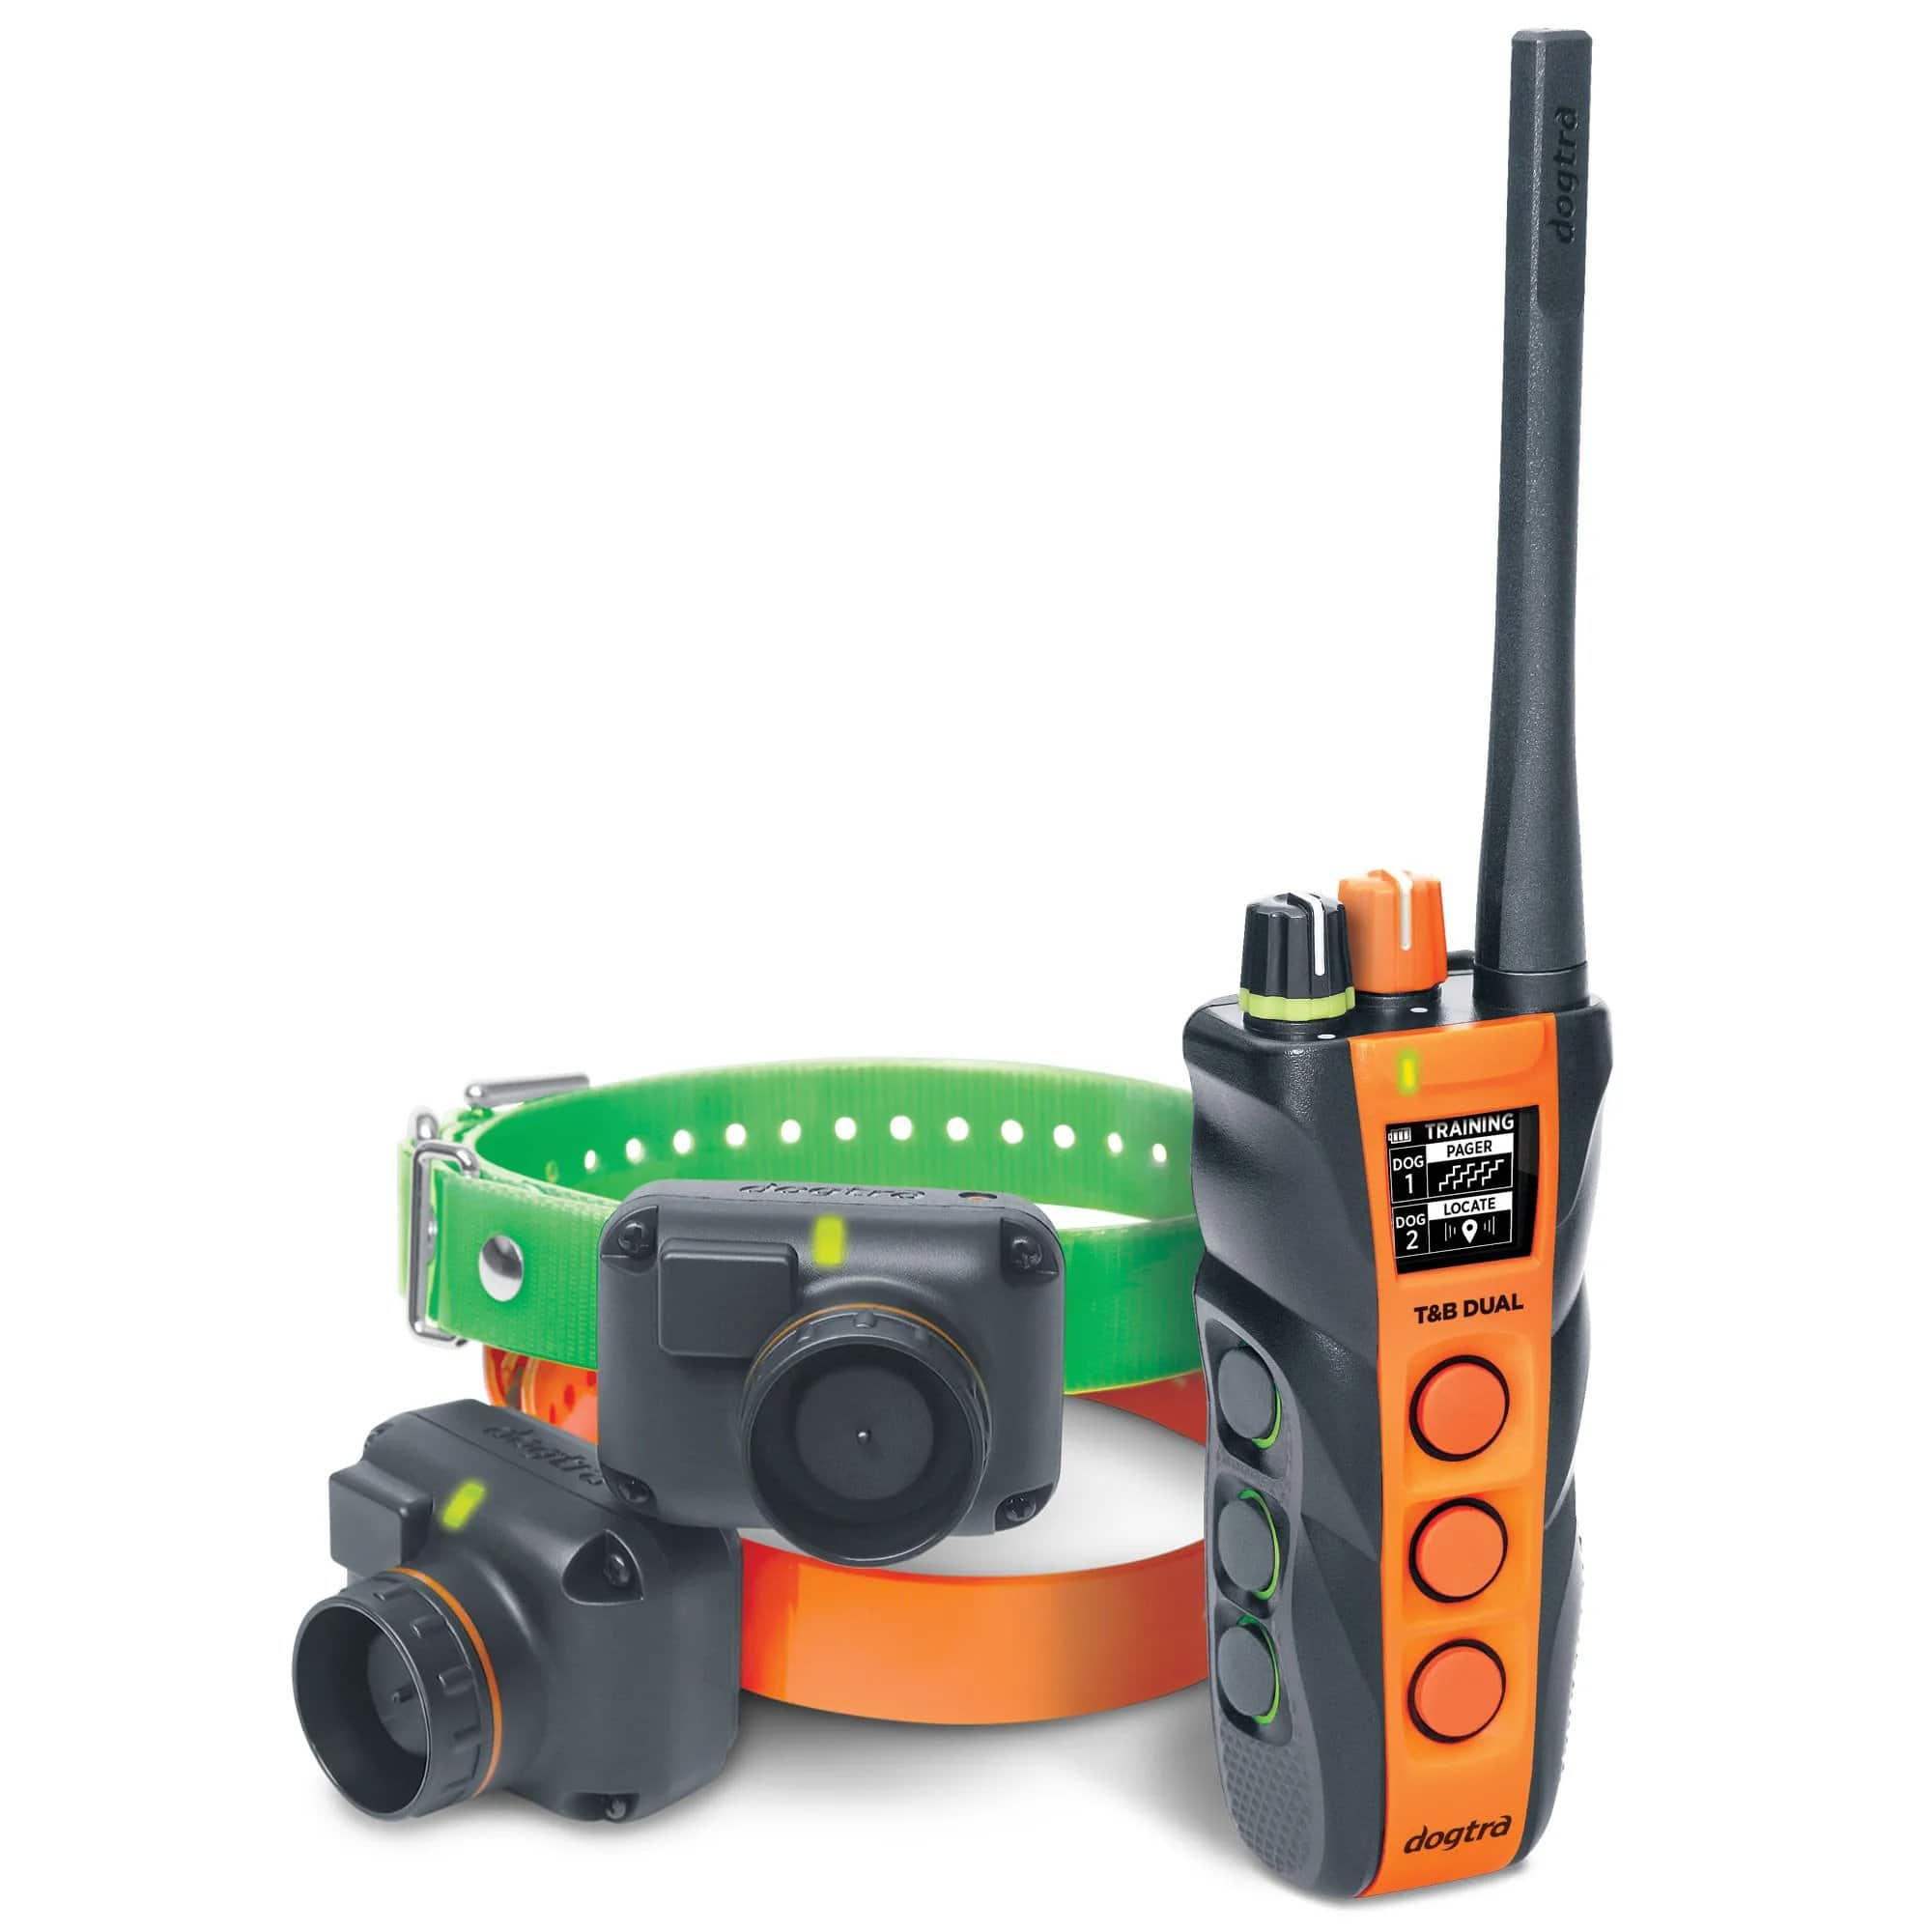 Dogtra Train/Beep 1.5 Mile 2 Dog Remote Trainer Actual